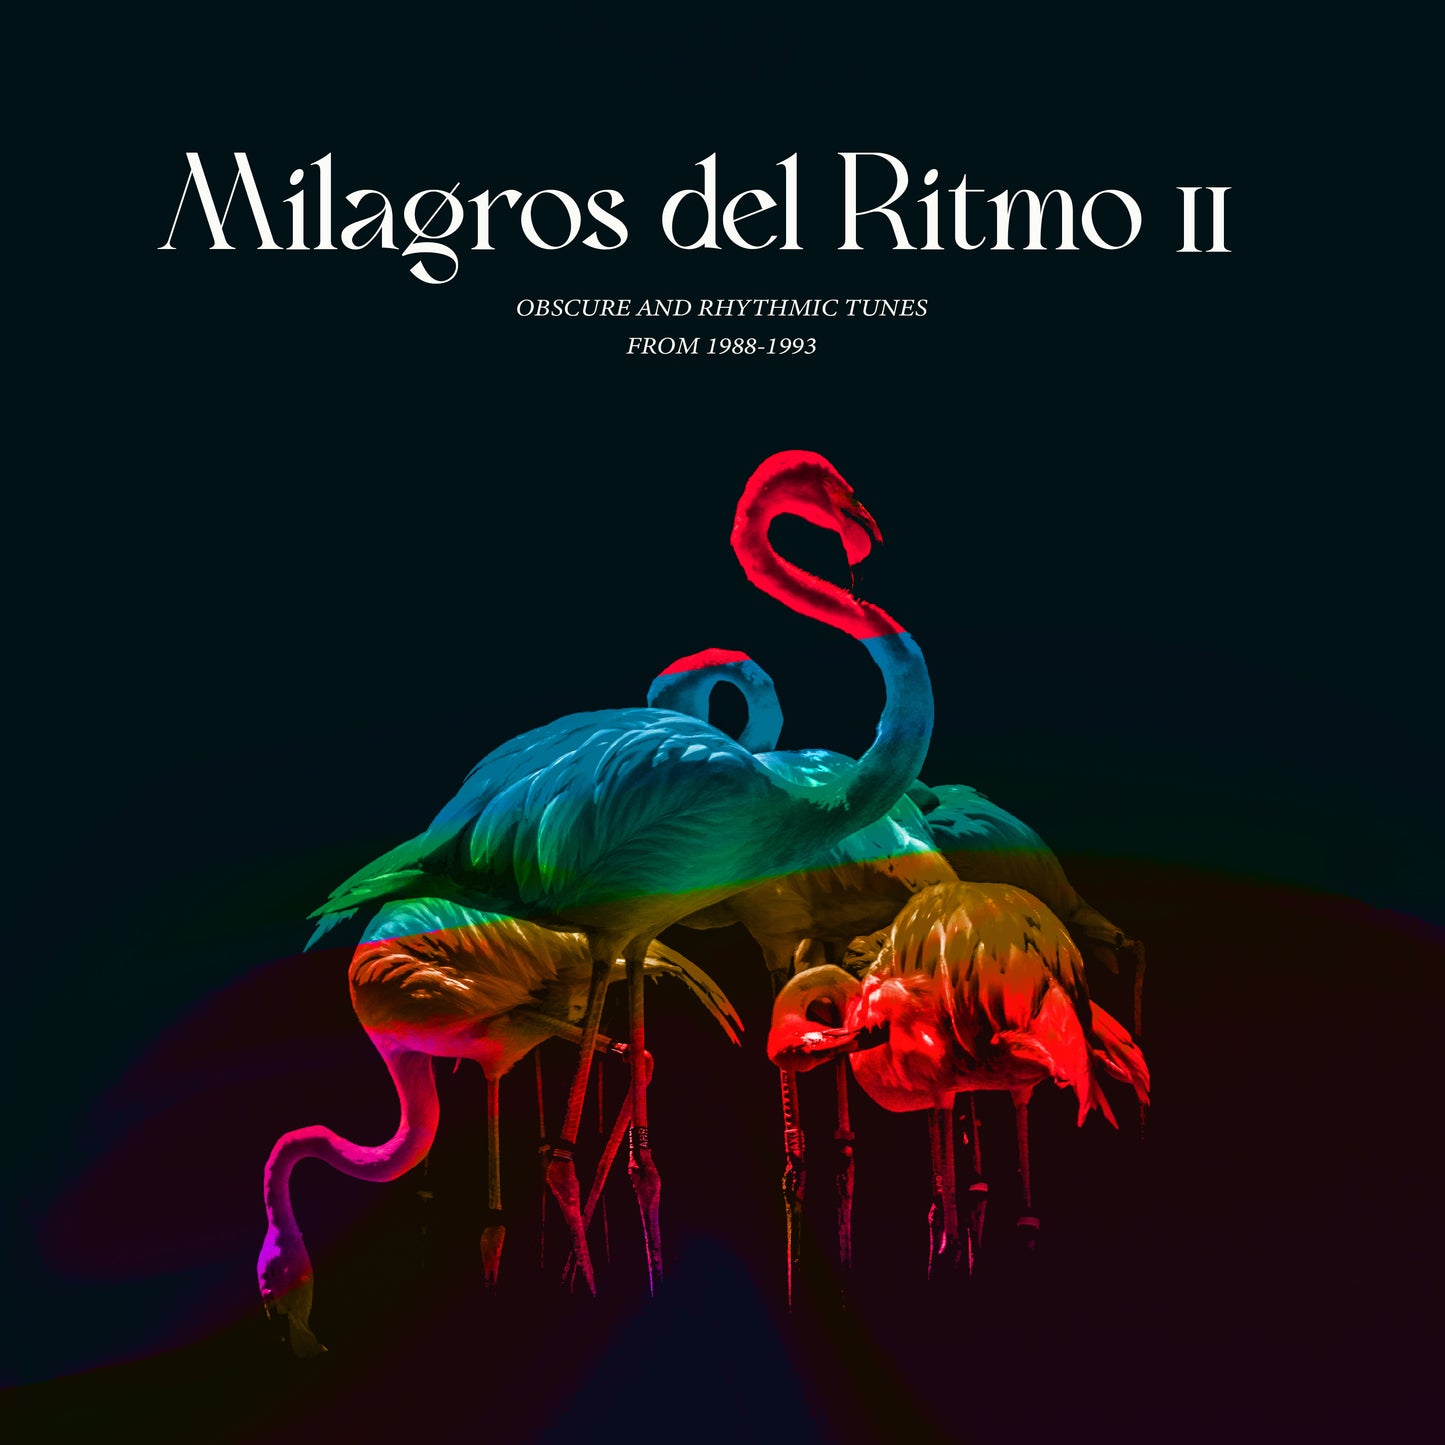 Jose Manuel presents: Milagros Del Ritmo II "Obscure And Rhythmic Tunes from 1988 -1993"